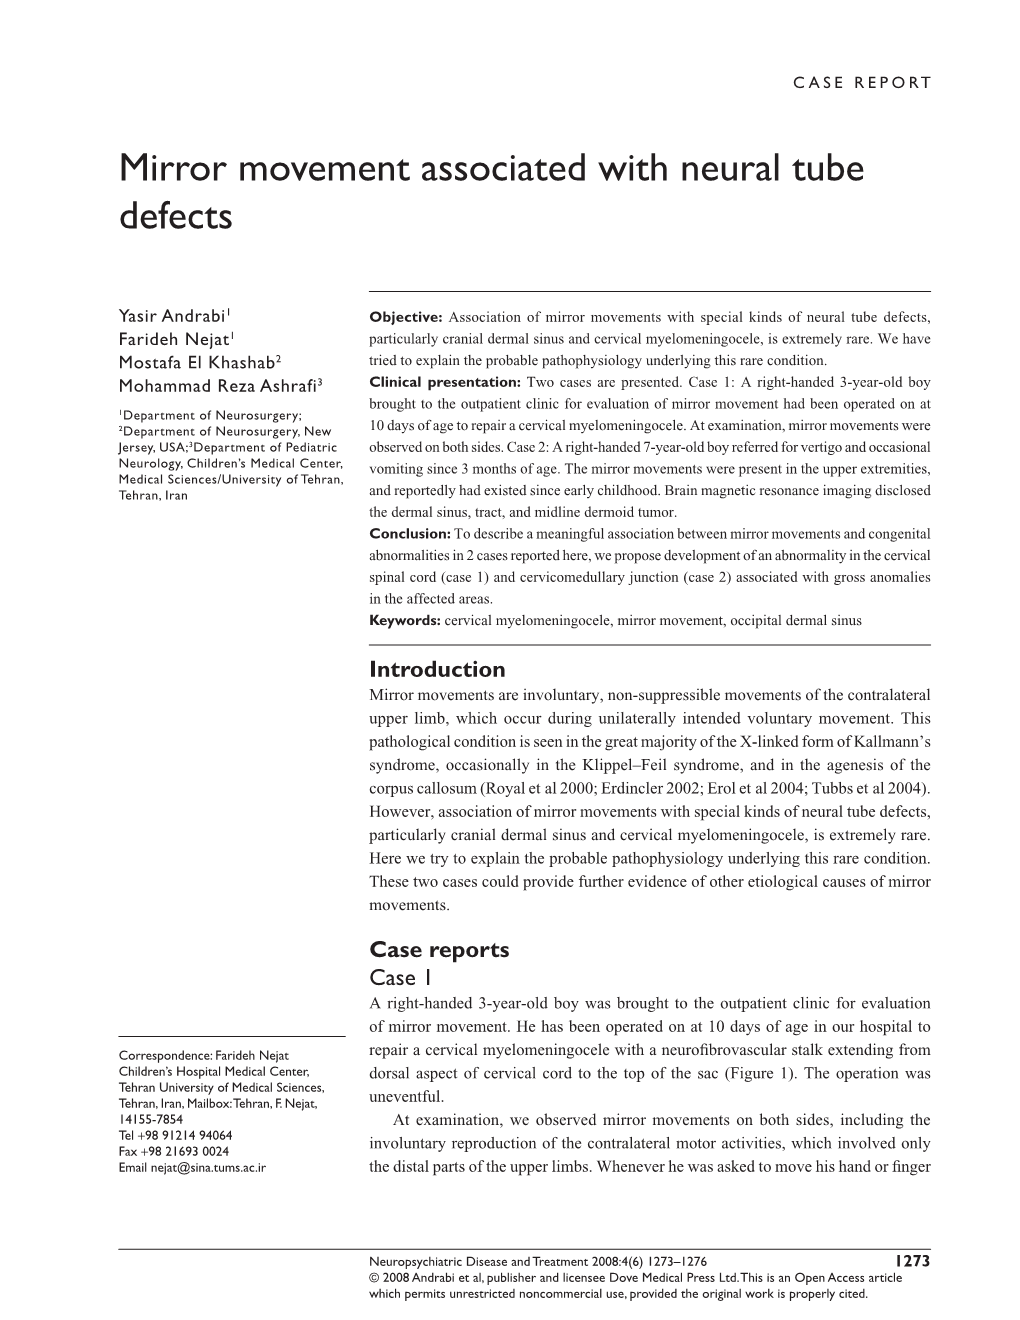 Mirror Movement Associated with Neural Tube Defects